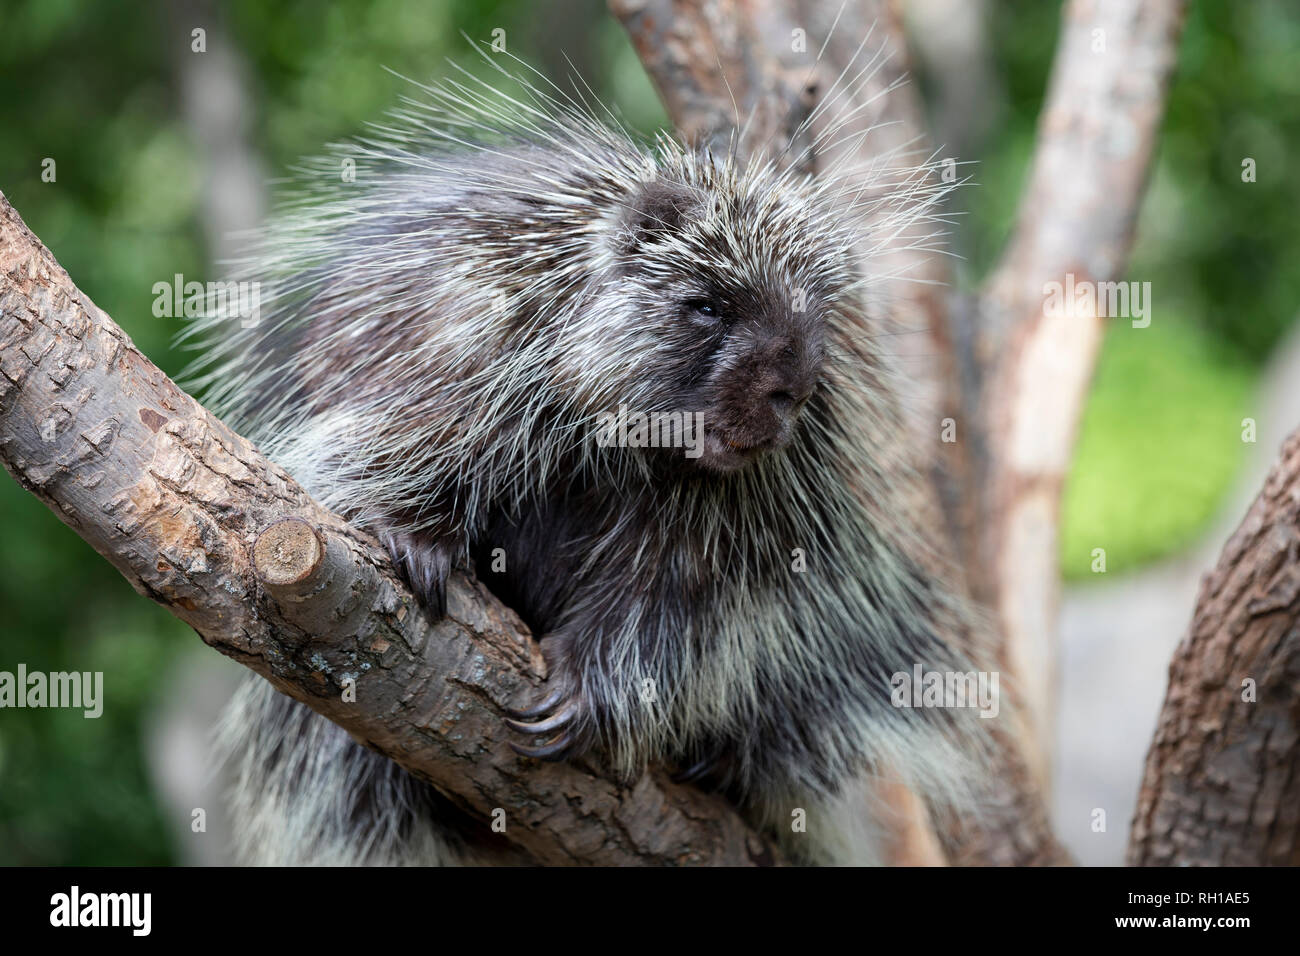 North American Porcupine (Erethizon Dorsatum) climbing a tree, also known as the Canadian Porcupine or common porcupine Stock Photo